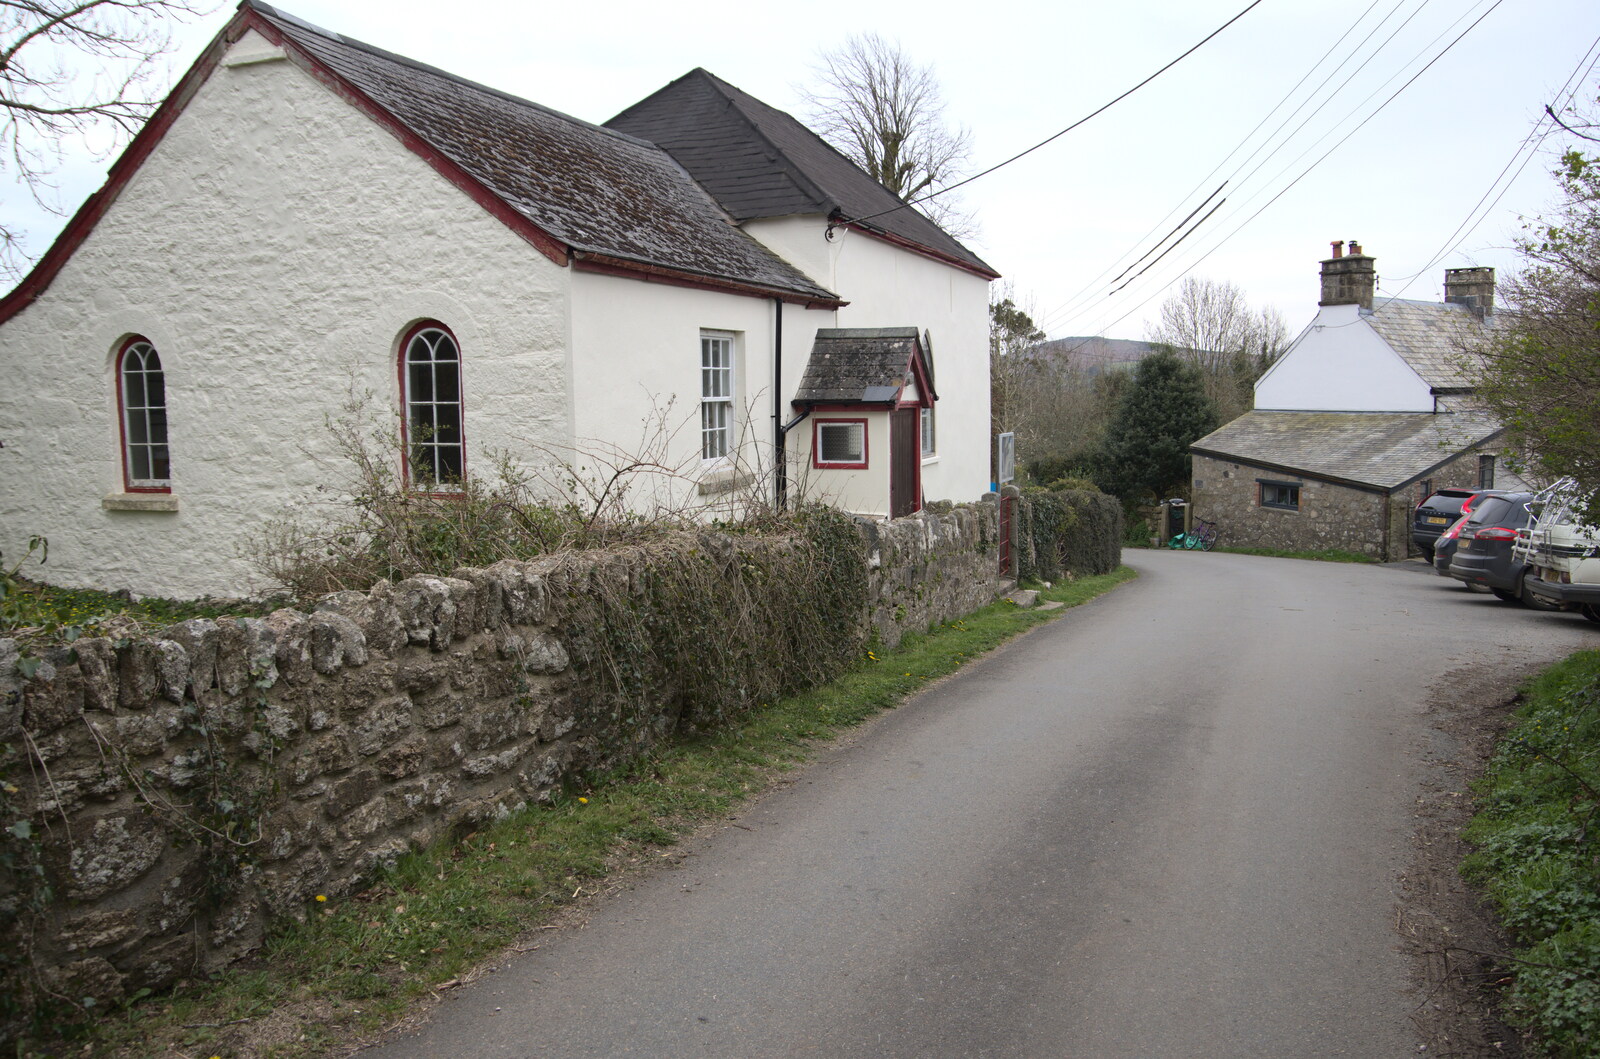 A view of the Methodist Chapel from Easter in South Zeal and Moretonhampstead, Devon - 9th April